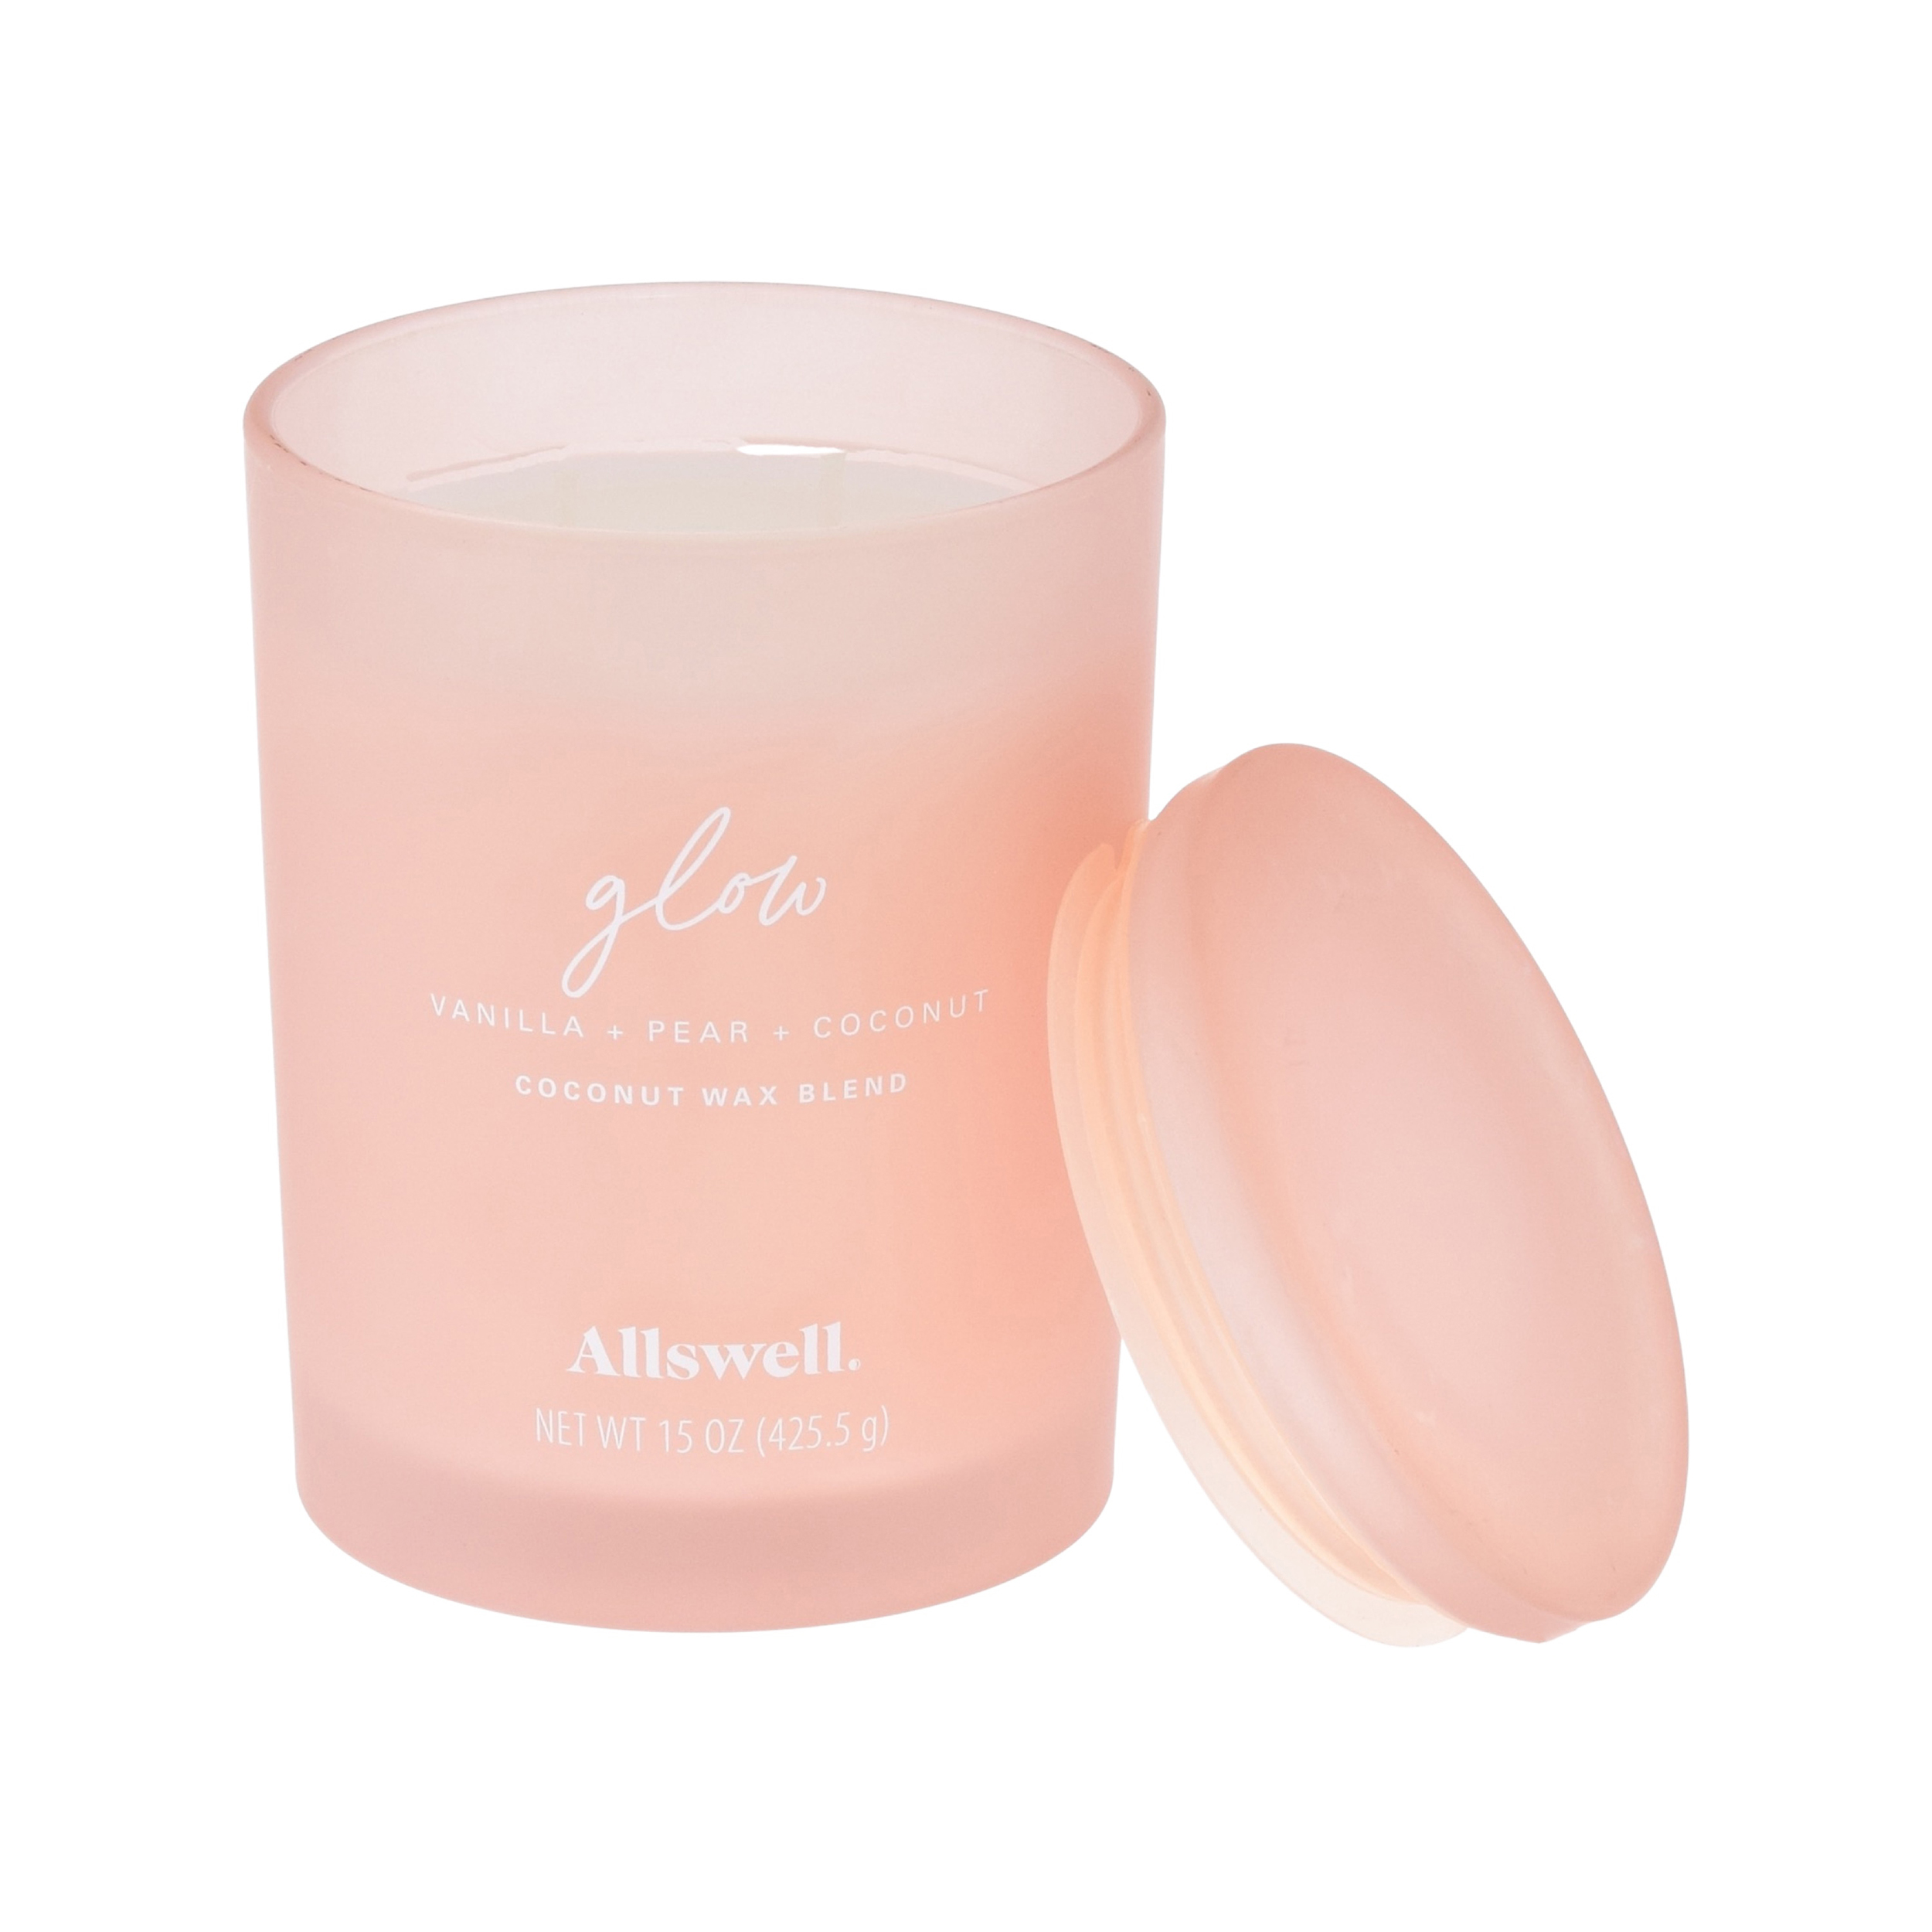 Allswell 15oz Scented 2-Wick Spa Candle - Glow (Vanilla + Pear + Coconut) - image 3 of 4